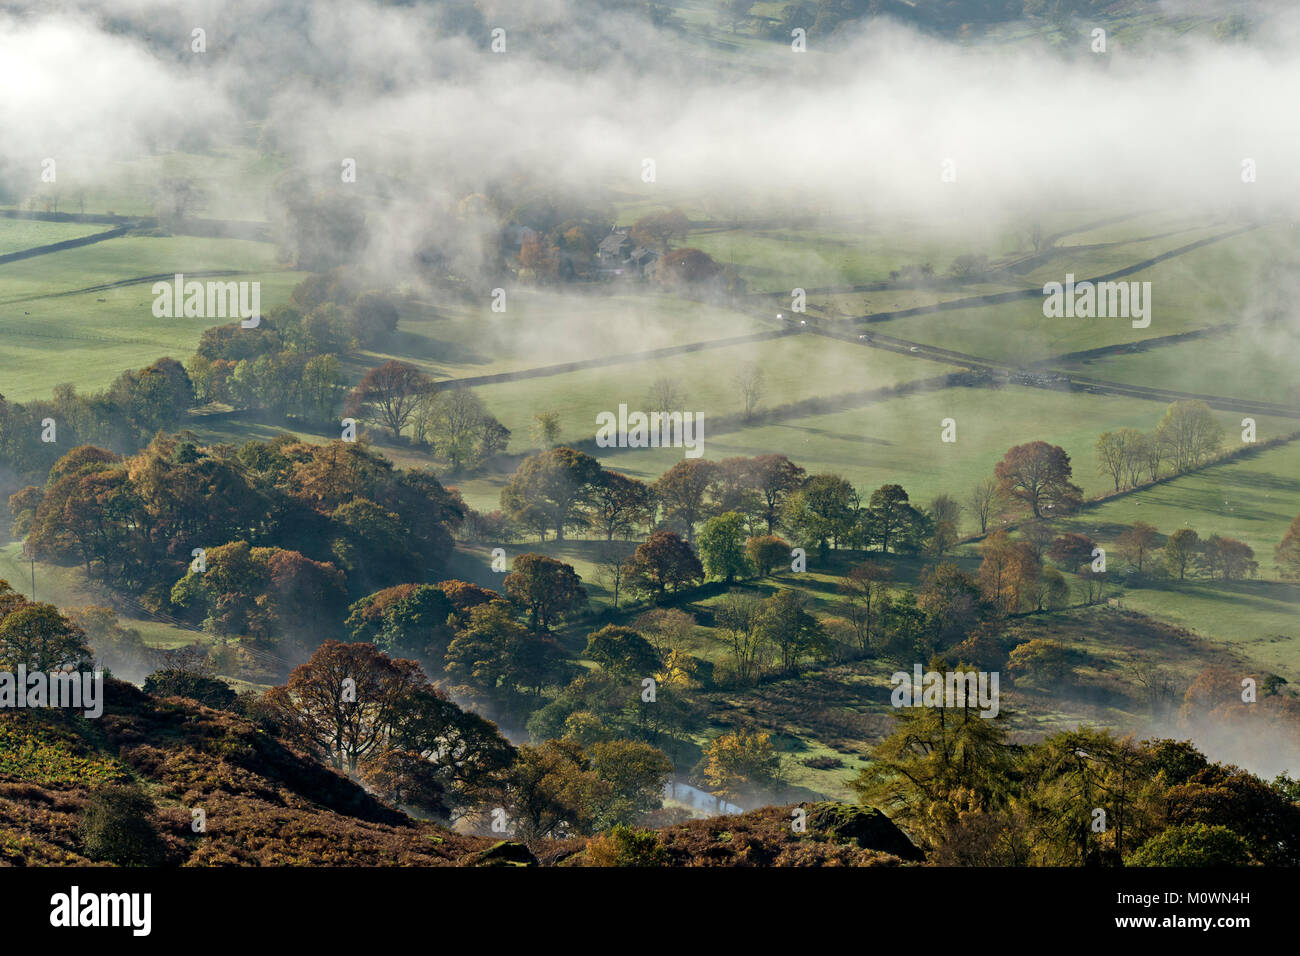 Looking down from above on low level early morning mist in the Patterdale valley in the English Lake District, Cumbria, England, UK Stock Photo